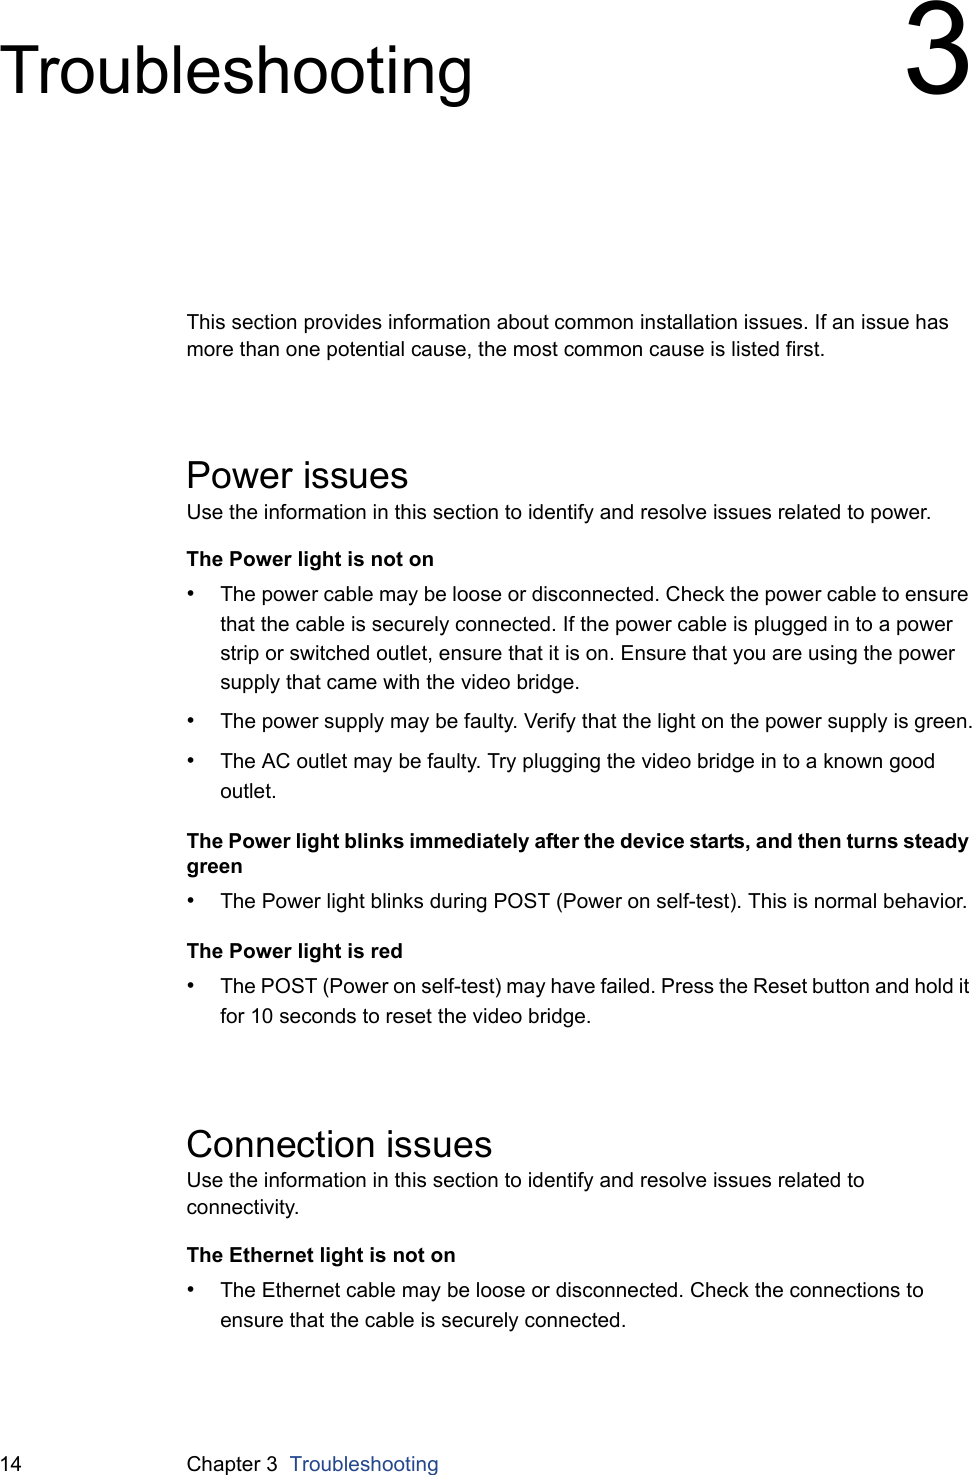 14 Chapter 3  TroubleshootingTroubleshooting 3This section provides information about common installation issues. If an issue has more than one potential cause, the most common cause is listed first.Power issuesUse the information in this section to identify and resolve issues related to power.The Power light is not on•The power cable may be loose or disconnected. Check the power cable to ensure that the cable is securely connected. If the power cable is plugged in to a power strip or switched outlet, ensure that it is on. Ensure that you are using the power supply that came with the video bridge.•The power supply may be faulty. Verify that the light on the power supply is green.•The AC outlet may be faulty. Try plugging the video bridge in to a known good outlet.The Power light blinks immediately after the device starts, and then turns steady green•The Power light blinks during POST (Power on self-test). This is normal behavior.The Power light is red•The POST (Power on self-test) may have failed. Press the Reset button and hold it for 10 seconds to reset the video bridge.Connection issuesUse the information in this section to identify and resolve issues related to connectivity.The Ethernet light is not on•The Ethernet cable may be loose or disconnected. Check the connections to ensure that the cable is securely connected.